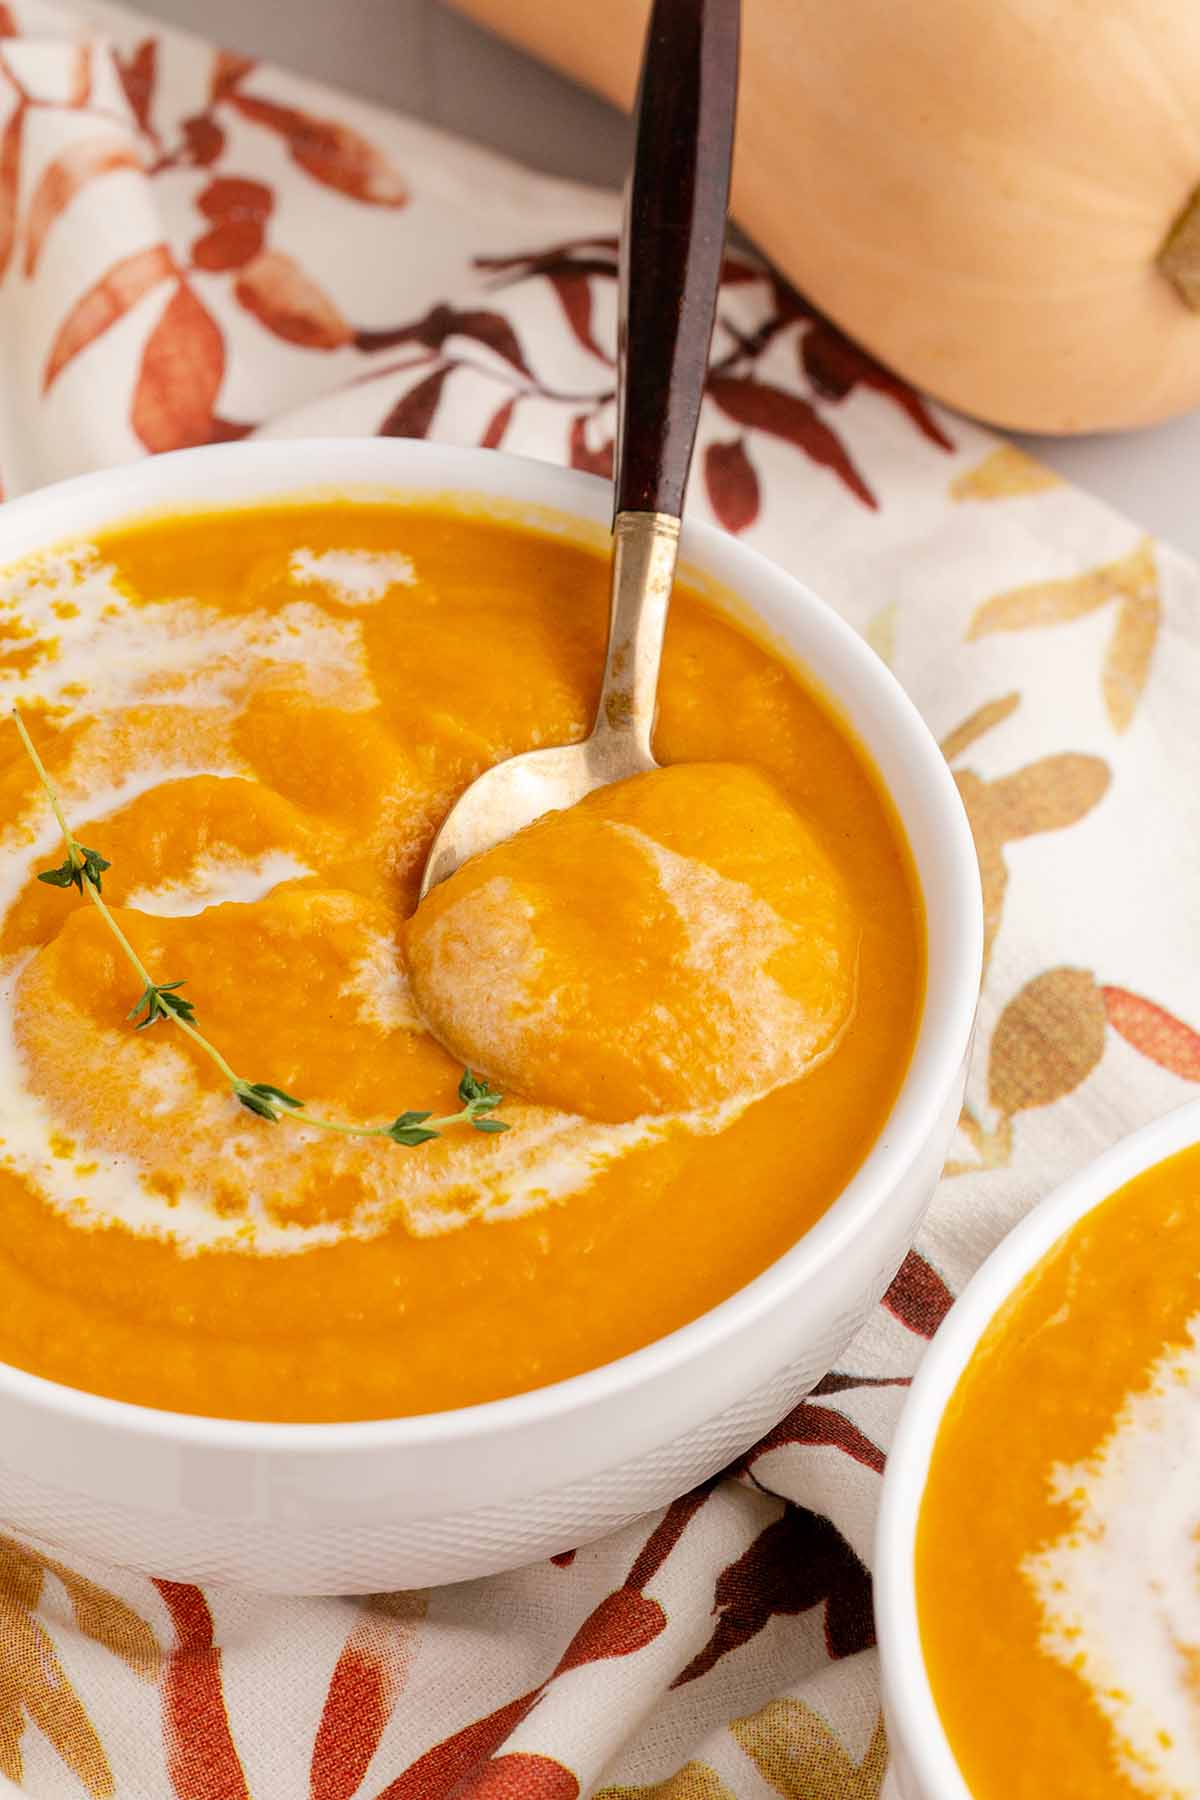 Creamy butternut squash soup in a white bowl with a spoon reaching in to scoop some up.